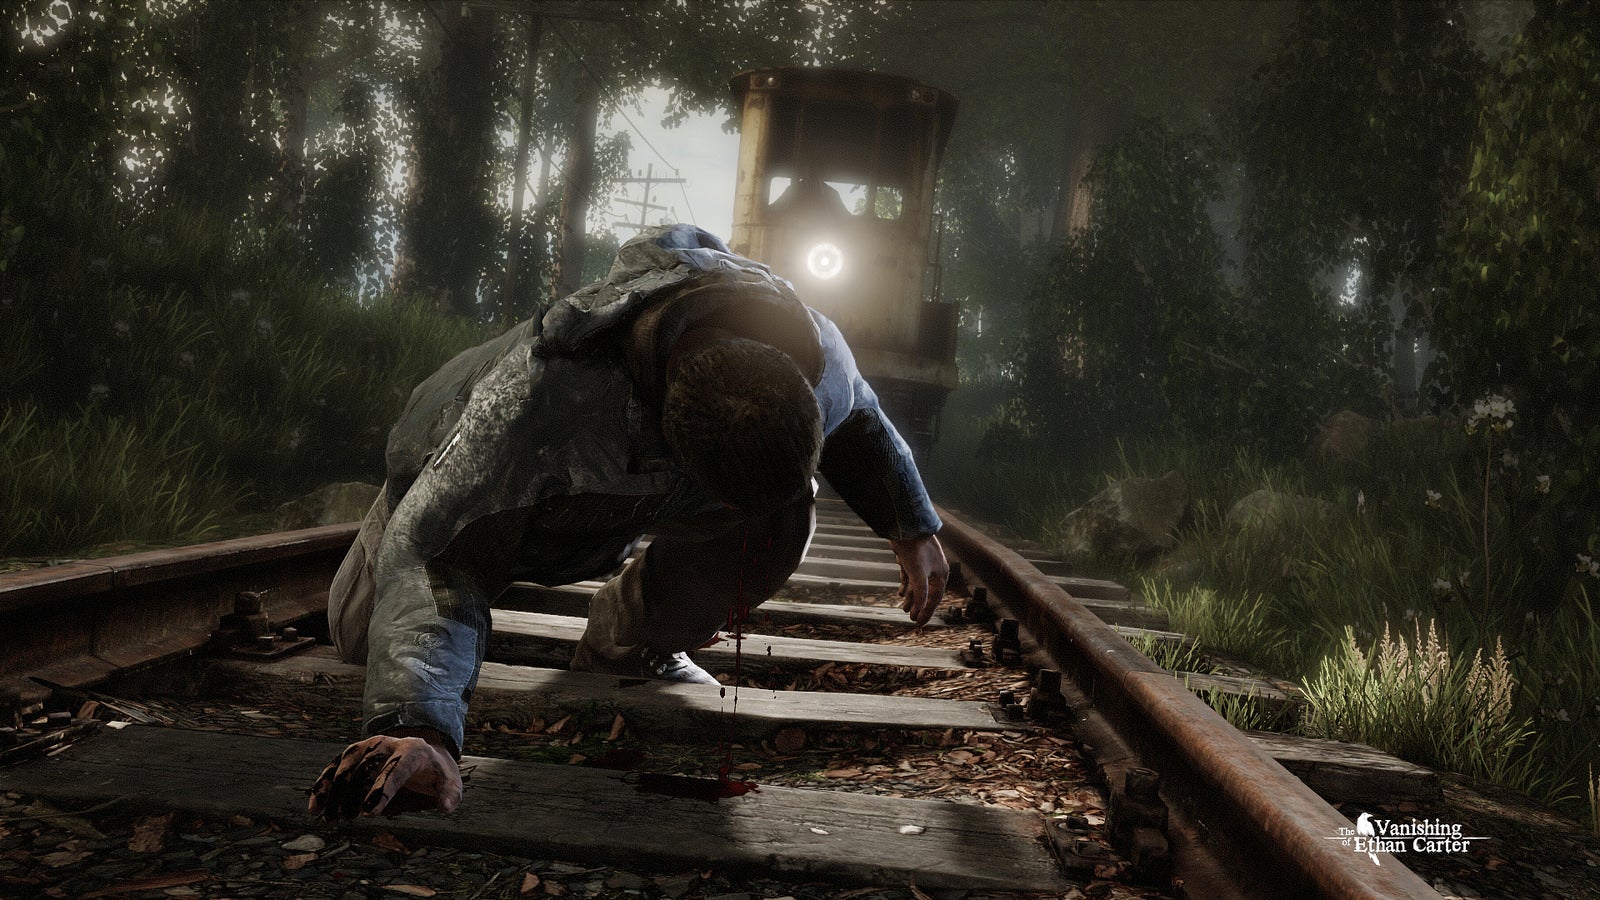 Image for PS4 owners can download The Vanishing of Ethan Carter next week